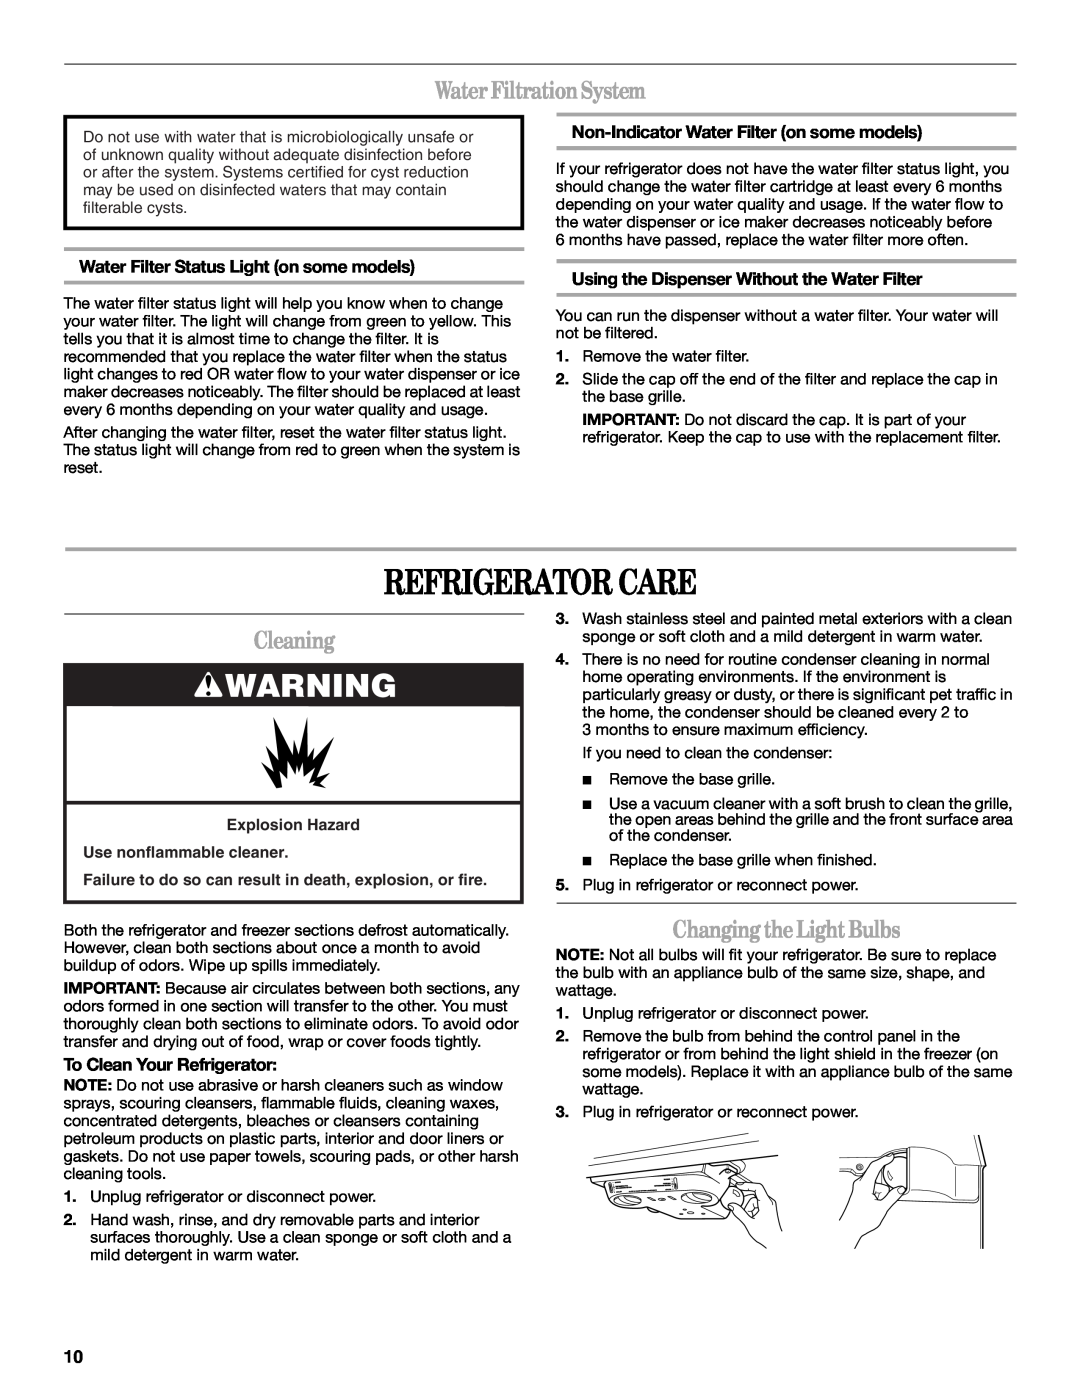 Whirlpool GR2FHTXV installation instructions Refrigerator Care, Water FiltrationSystem, Cleaning, Changing the Light Bulbs 